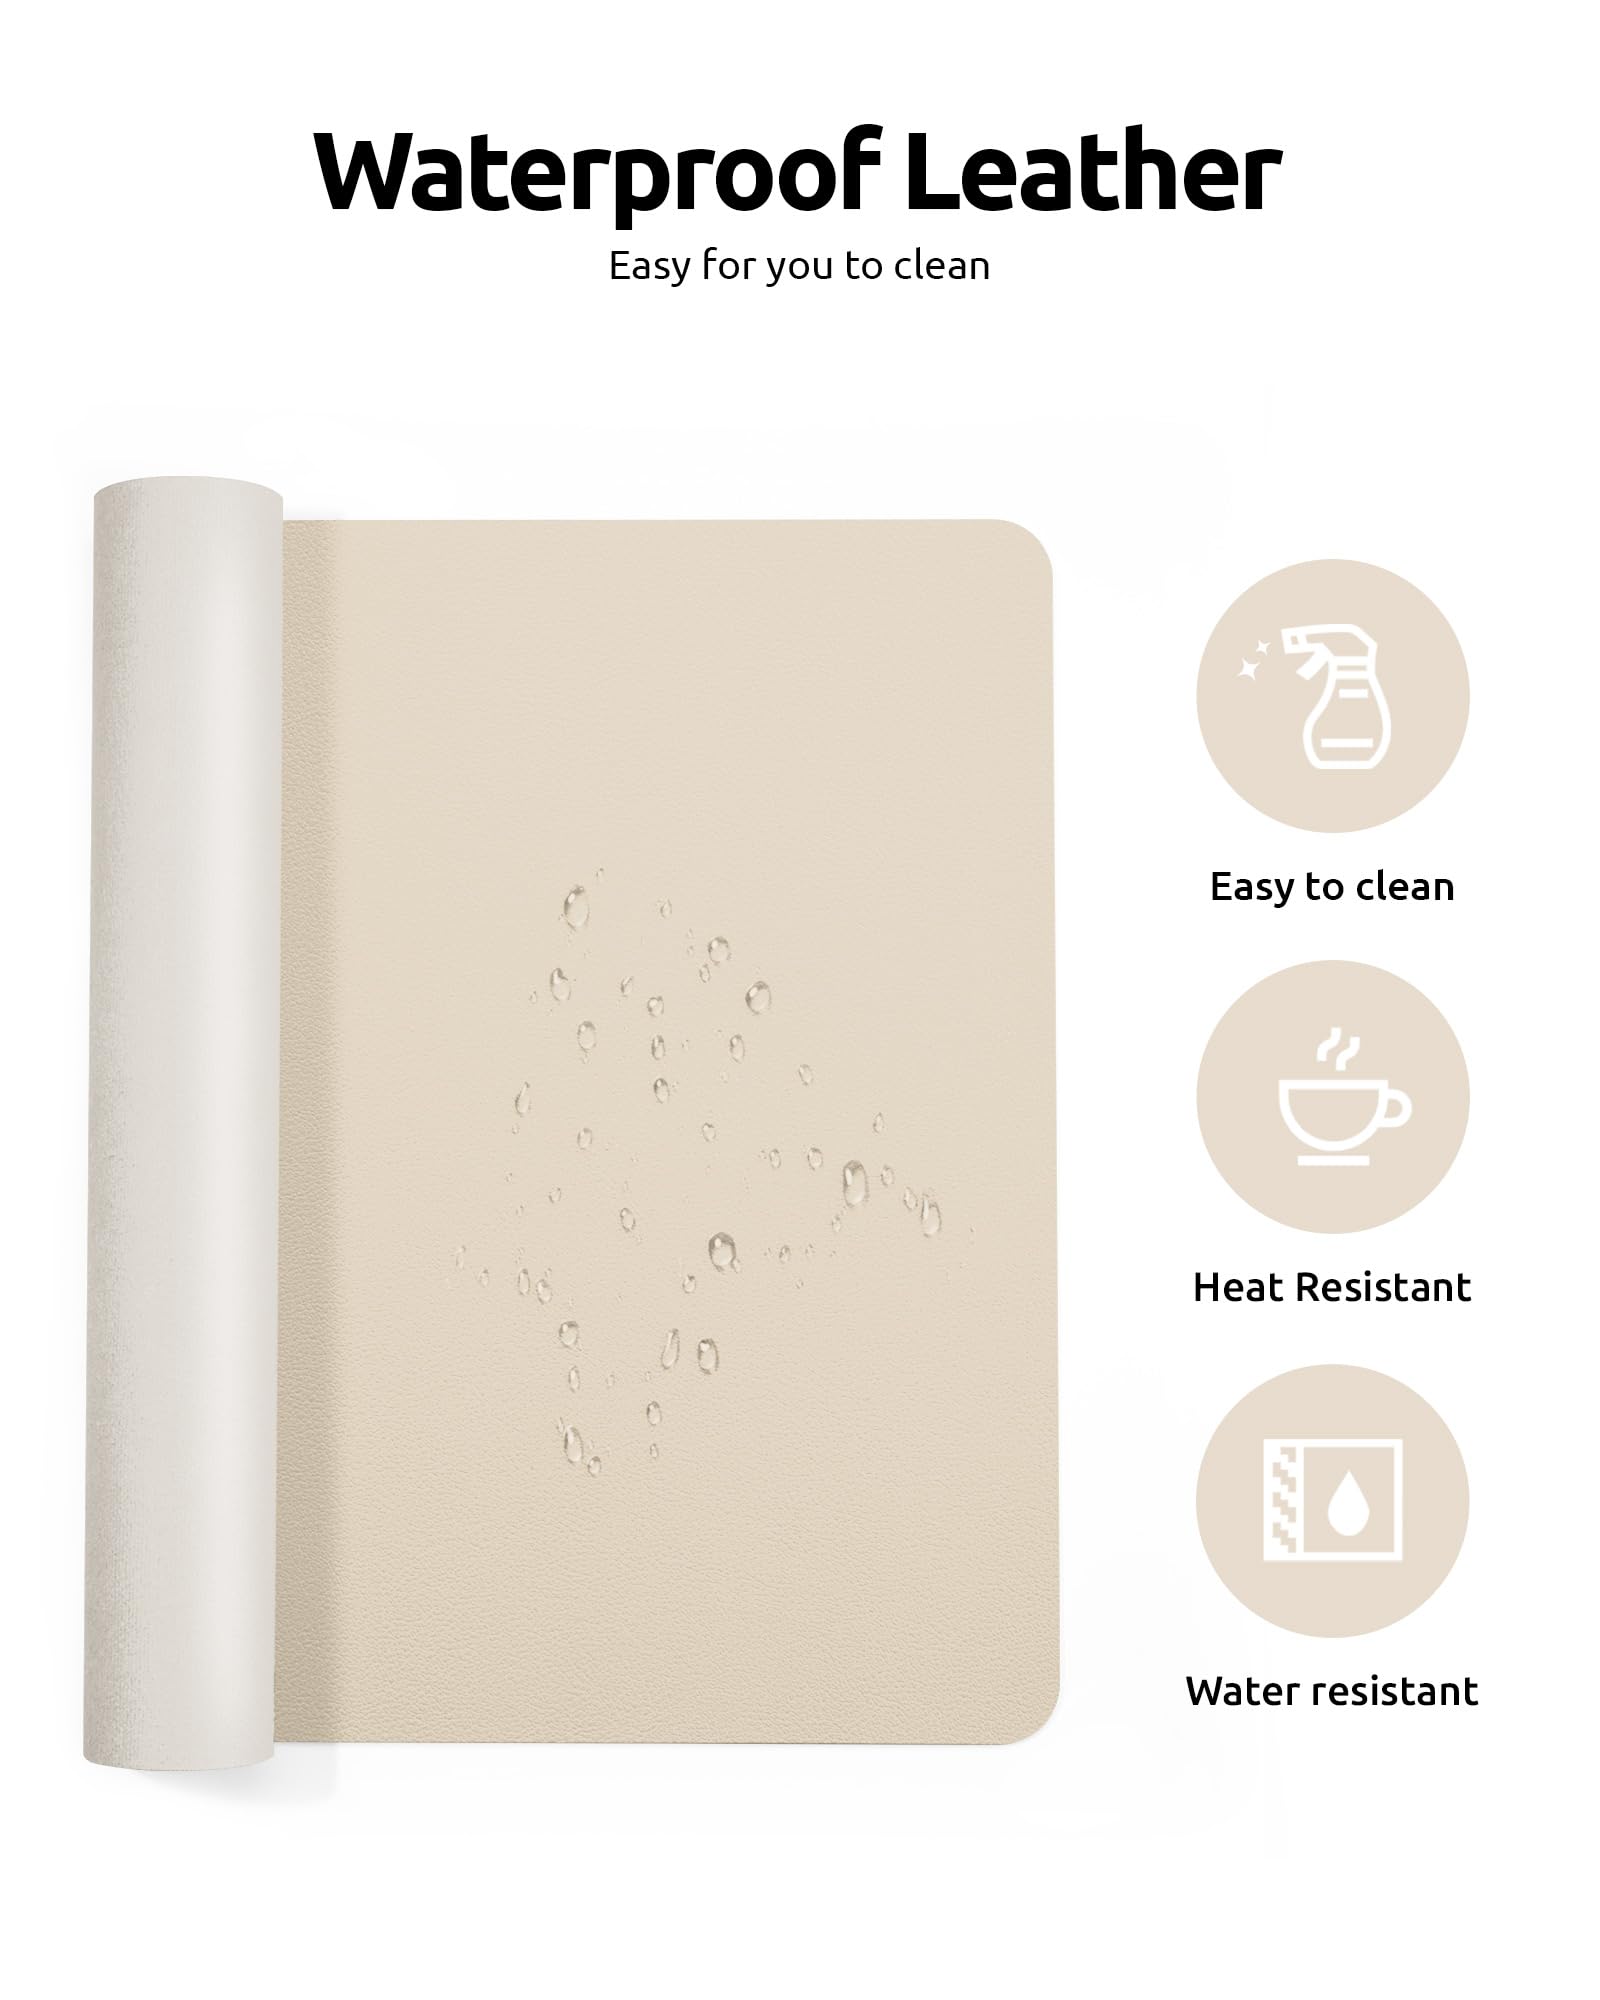 YSAGi Leather Desk Pad Protector, Office Desk Mat, Large Mouse Pad, Non-Slip PU Leather Desk Blotter, Laptop Desk Pad, Waterproof Desk Writing Pad for Office and Home (Eggshell, 23.6" x 13.8")